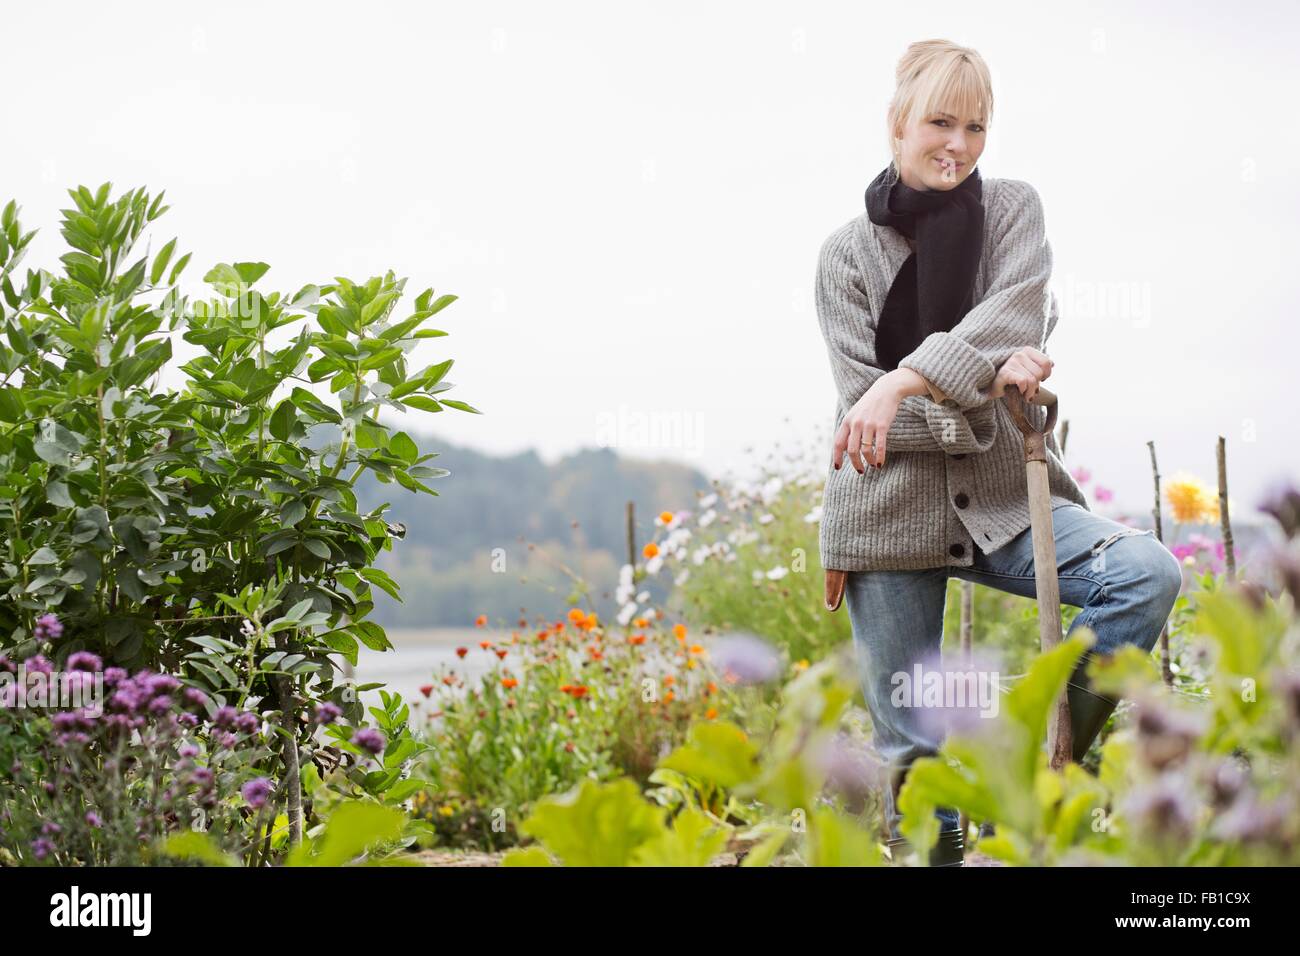 Portrait of mid adult woman digging in organic garden Stock Photo